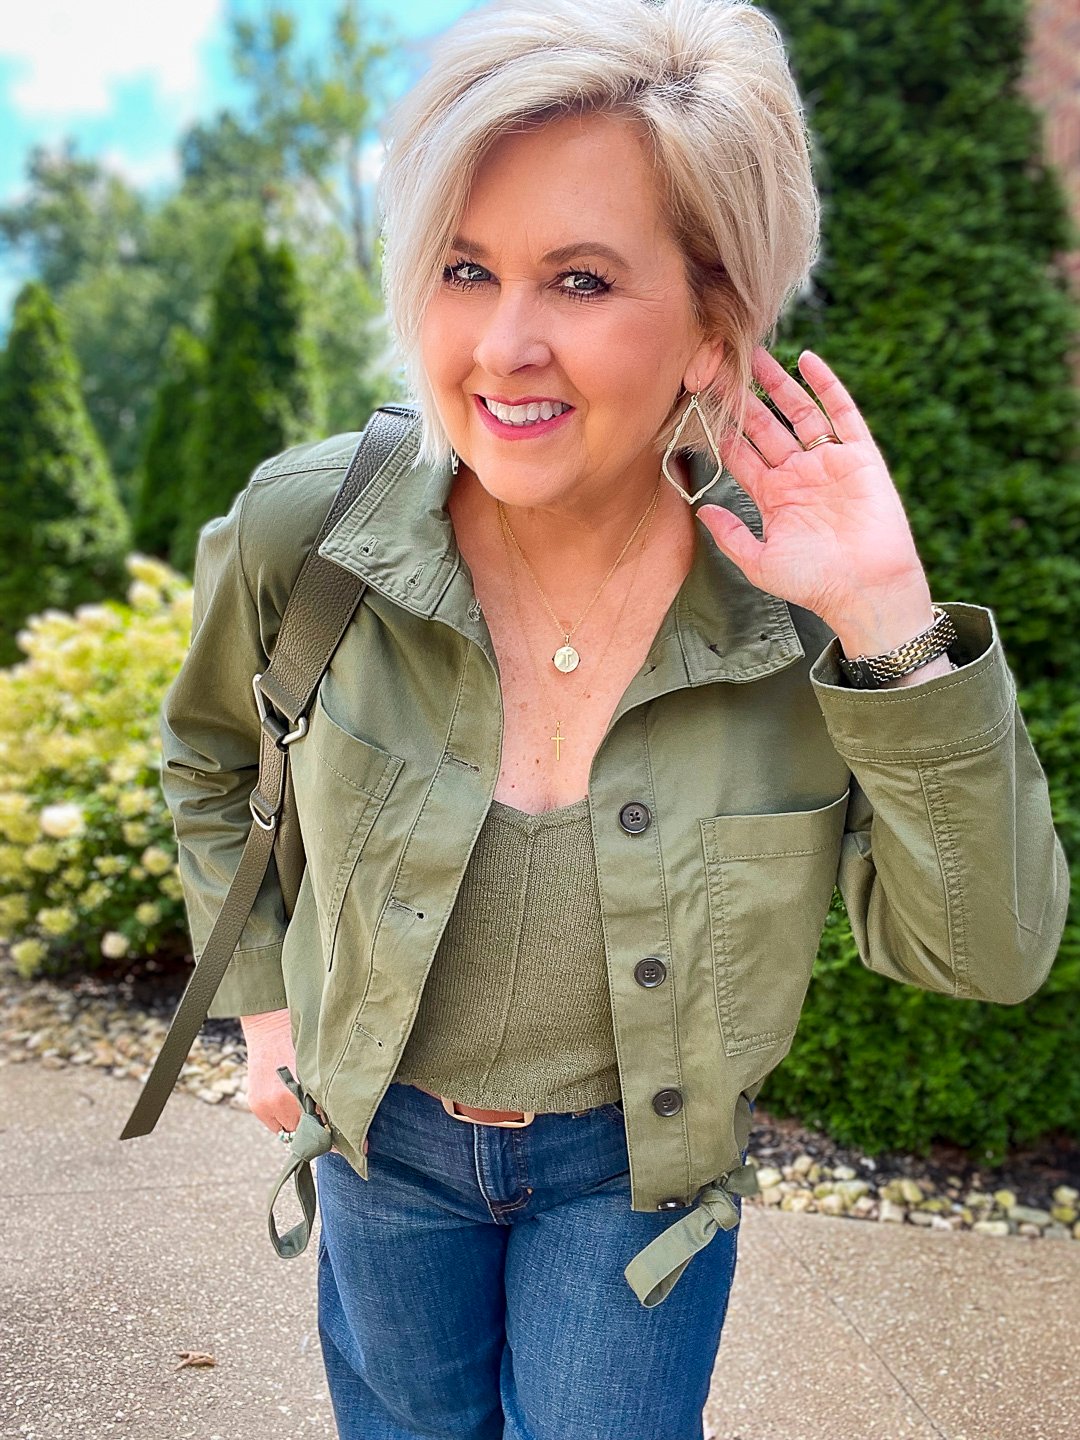 Over 40 Fashion Blogger, Tania Stephens is wearing an olive green jacket and sweater tank from Banana Republic4